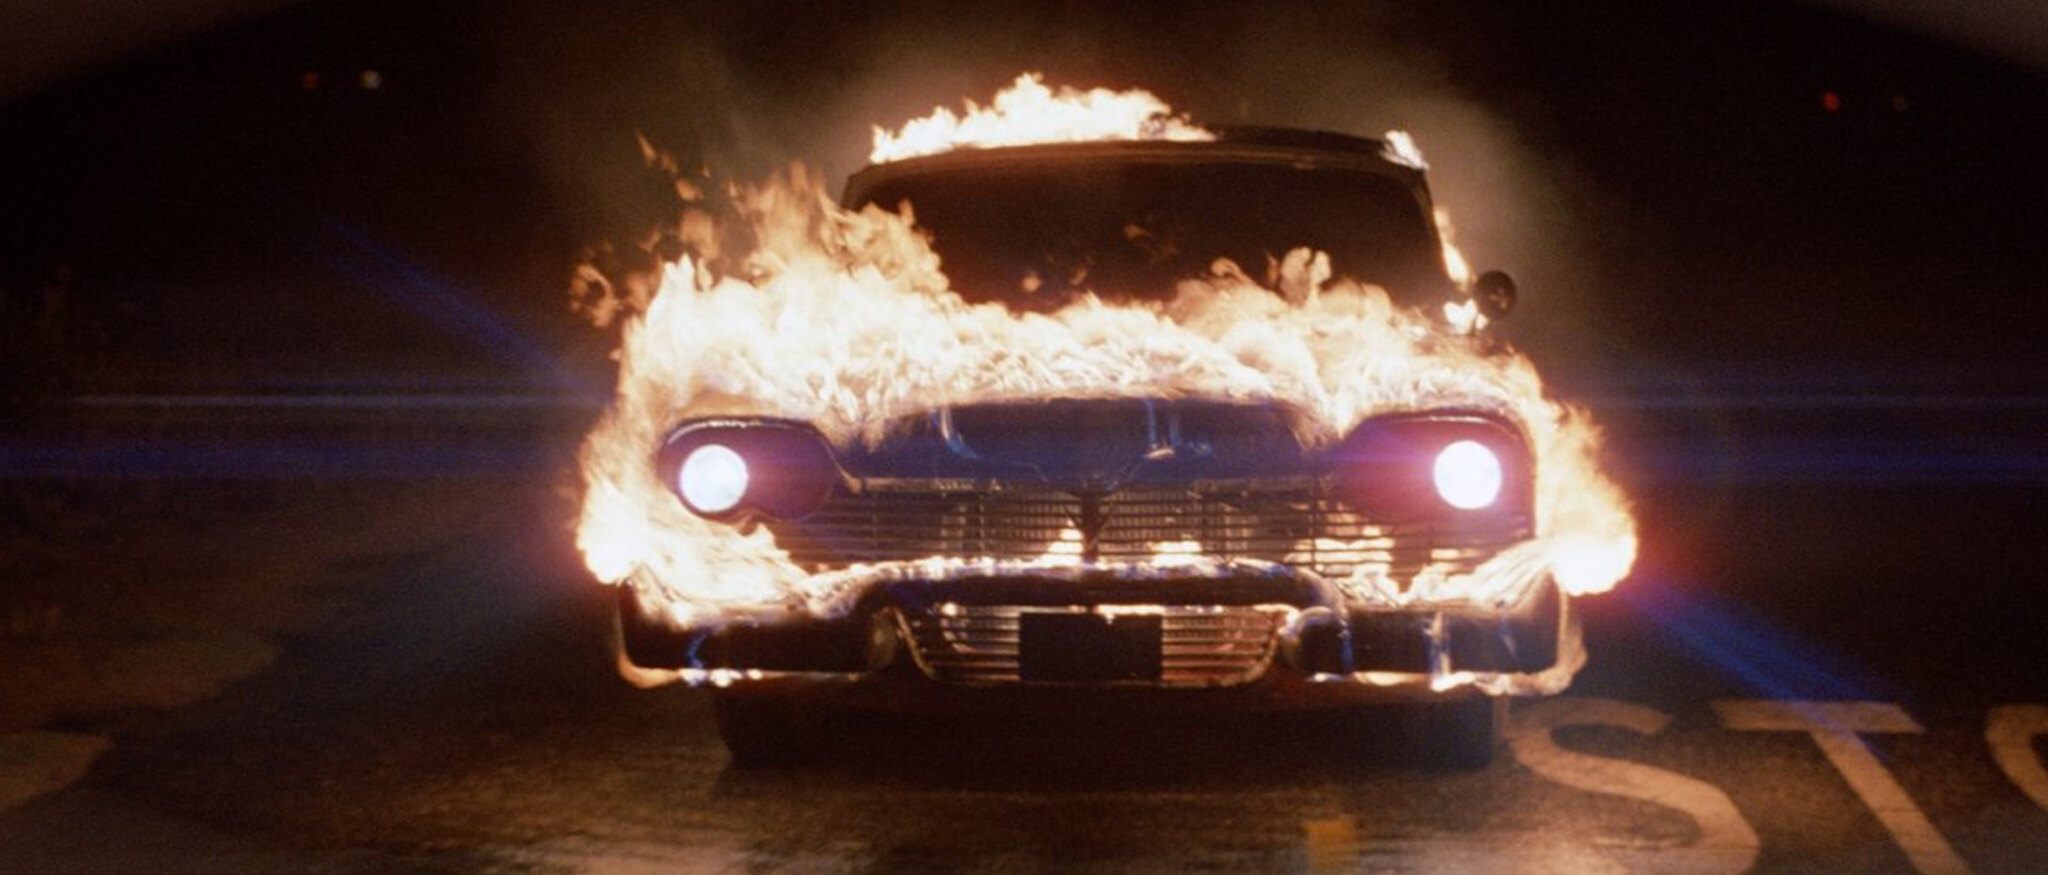 Top six: Best scary car movies